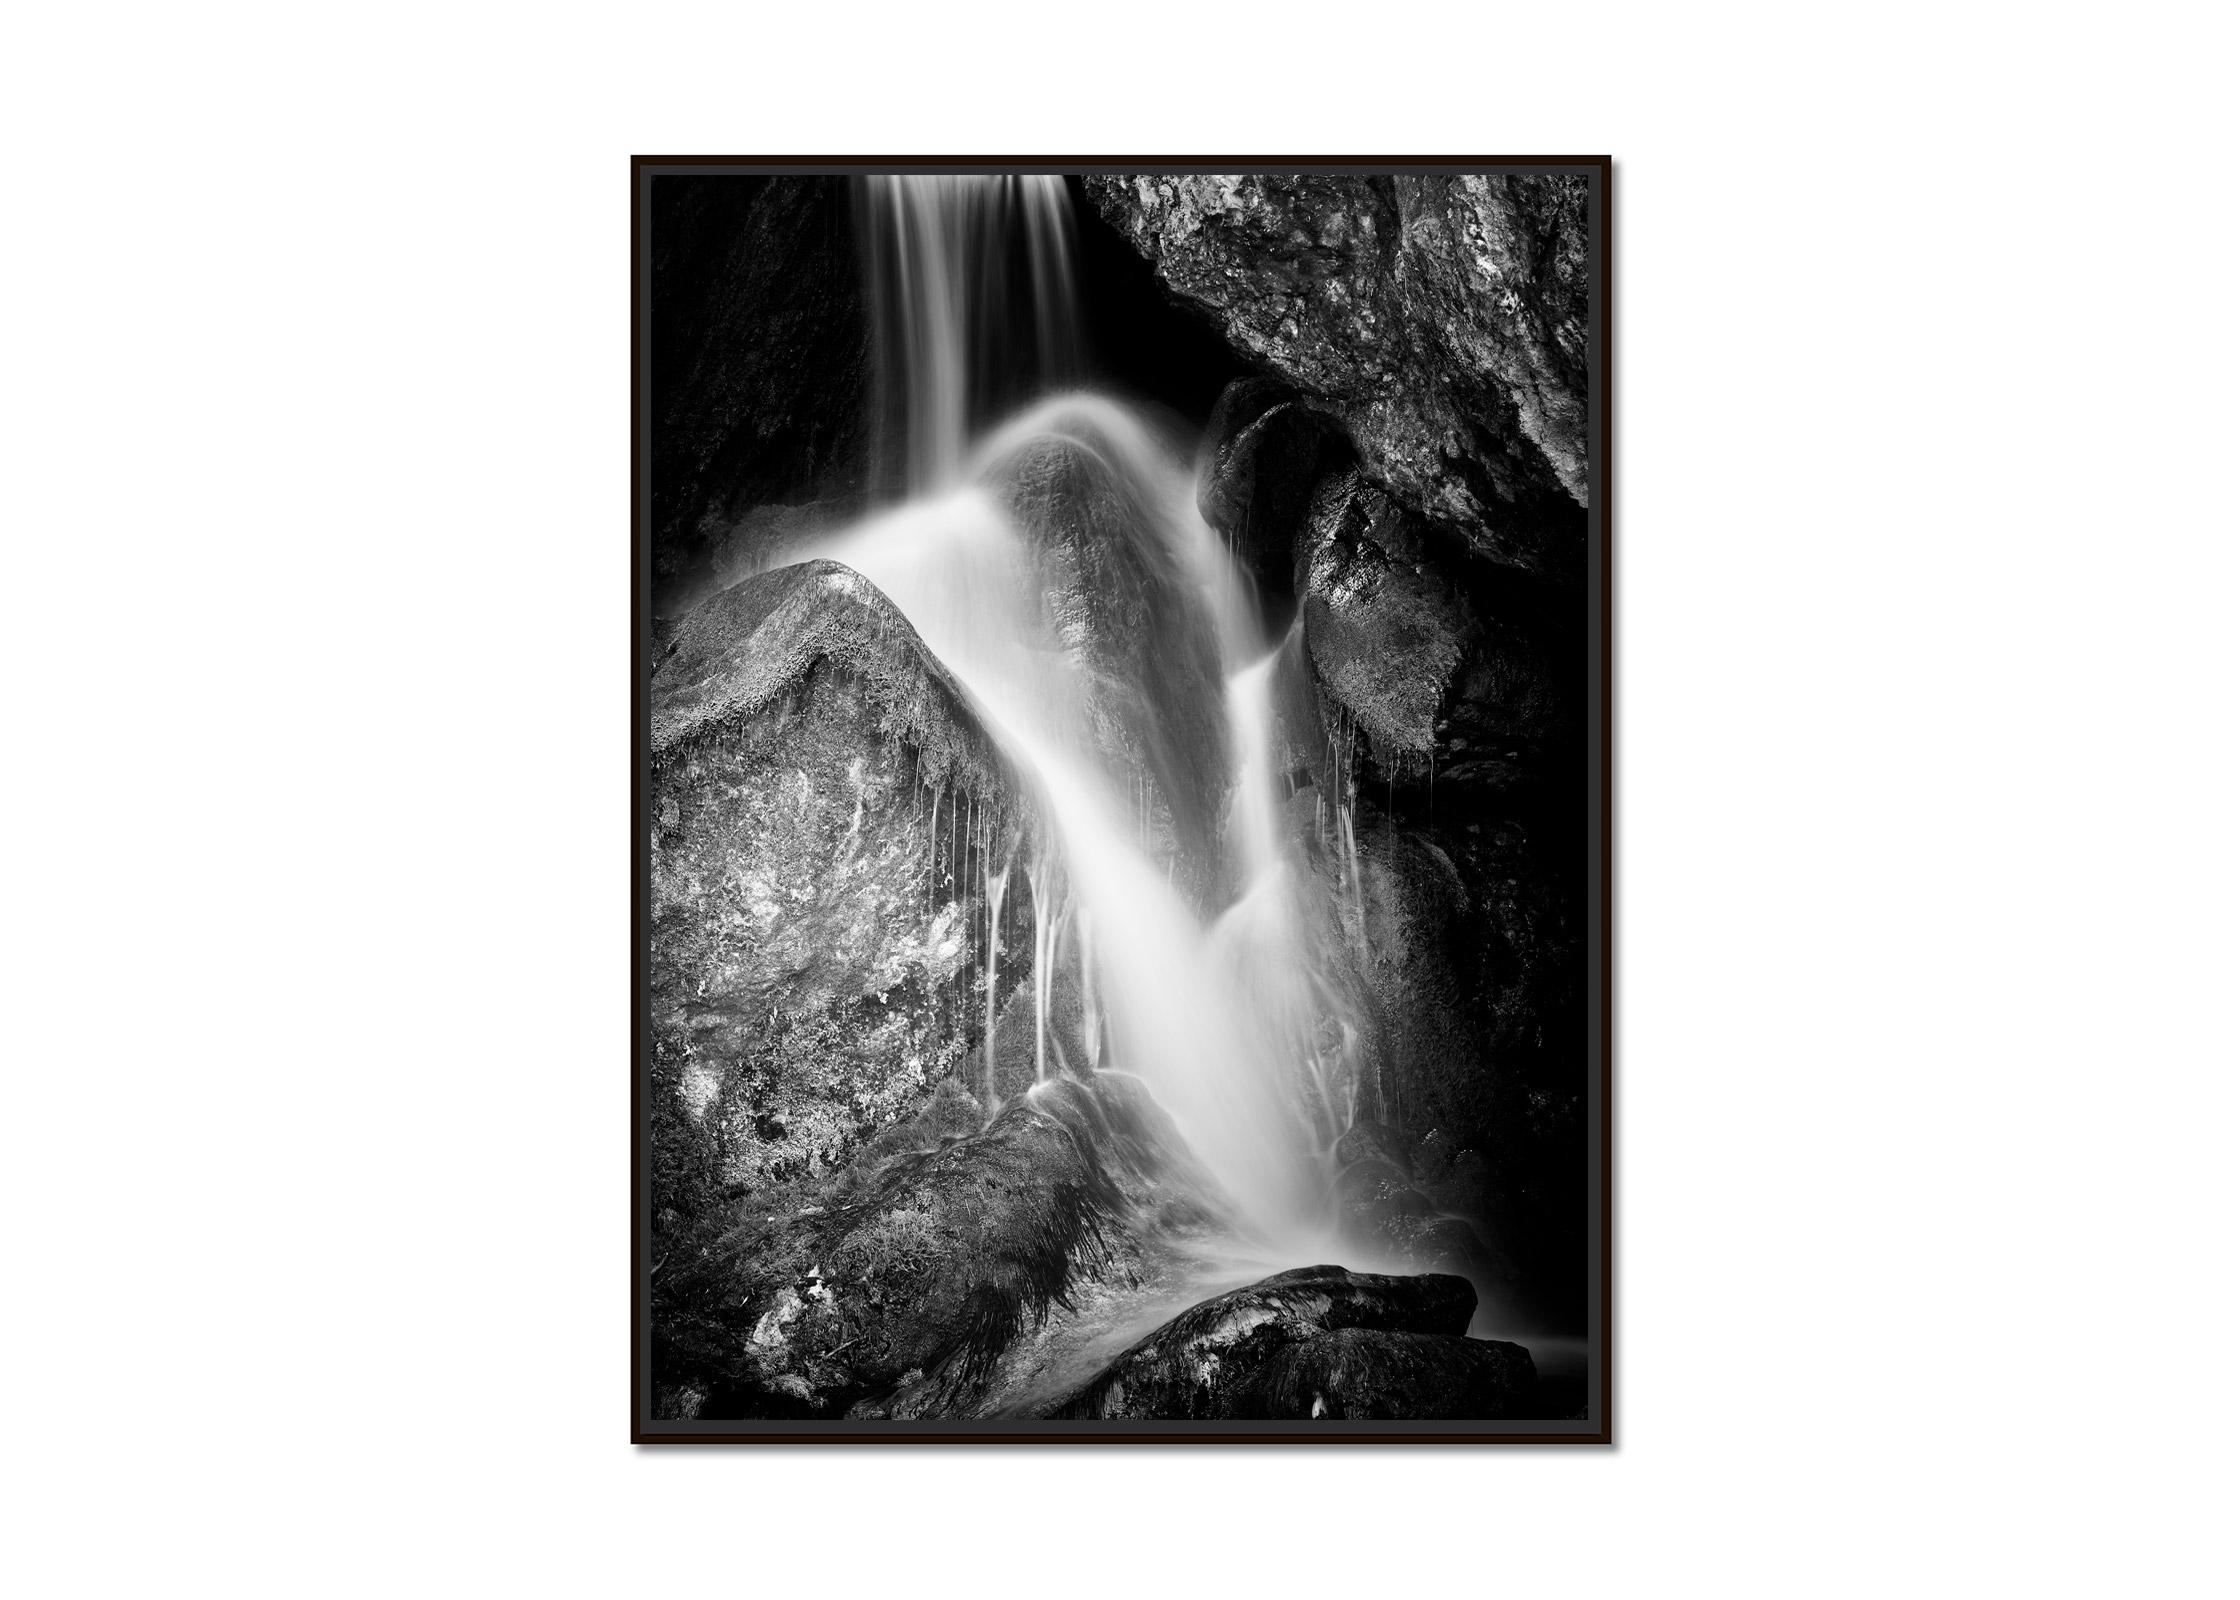 Waterfall detail, black and white long exposure waterscape fine art photography - Photograph by Gerald Berghammer